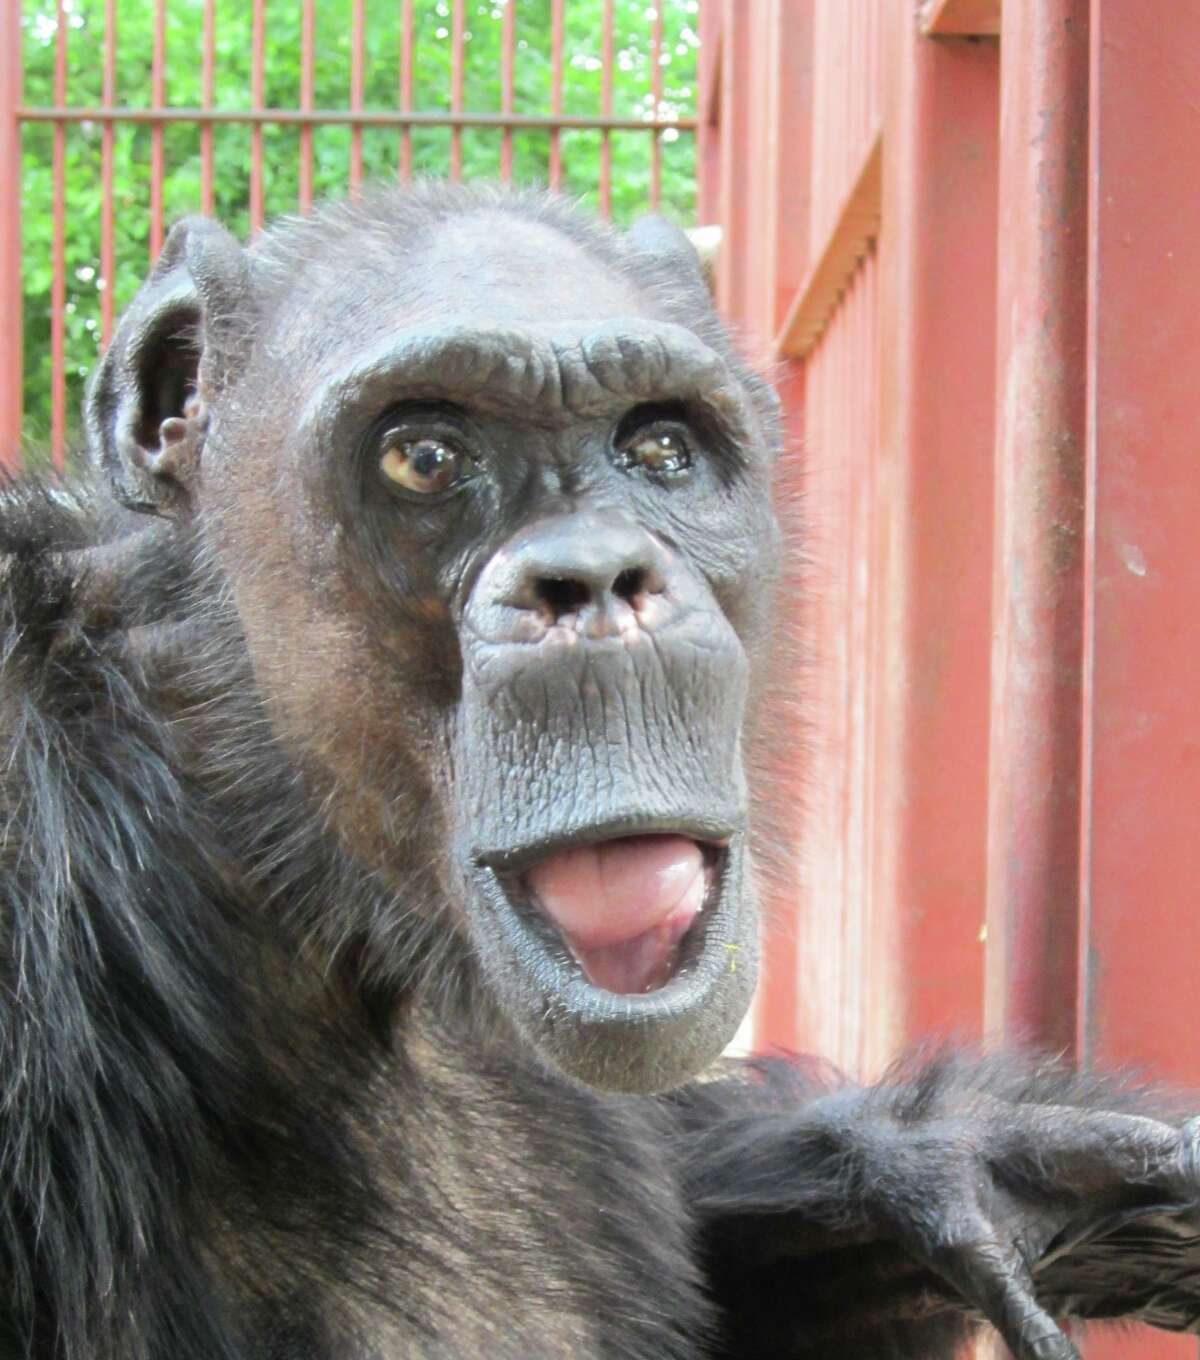 Oliver, a male chimpanzee who lived at Primarily Primates and was known to many at as the "Humanzee" for his proclivity to walk upright, died Saturday, June 2, 2012 according to Primarily Primates officials.